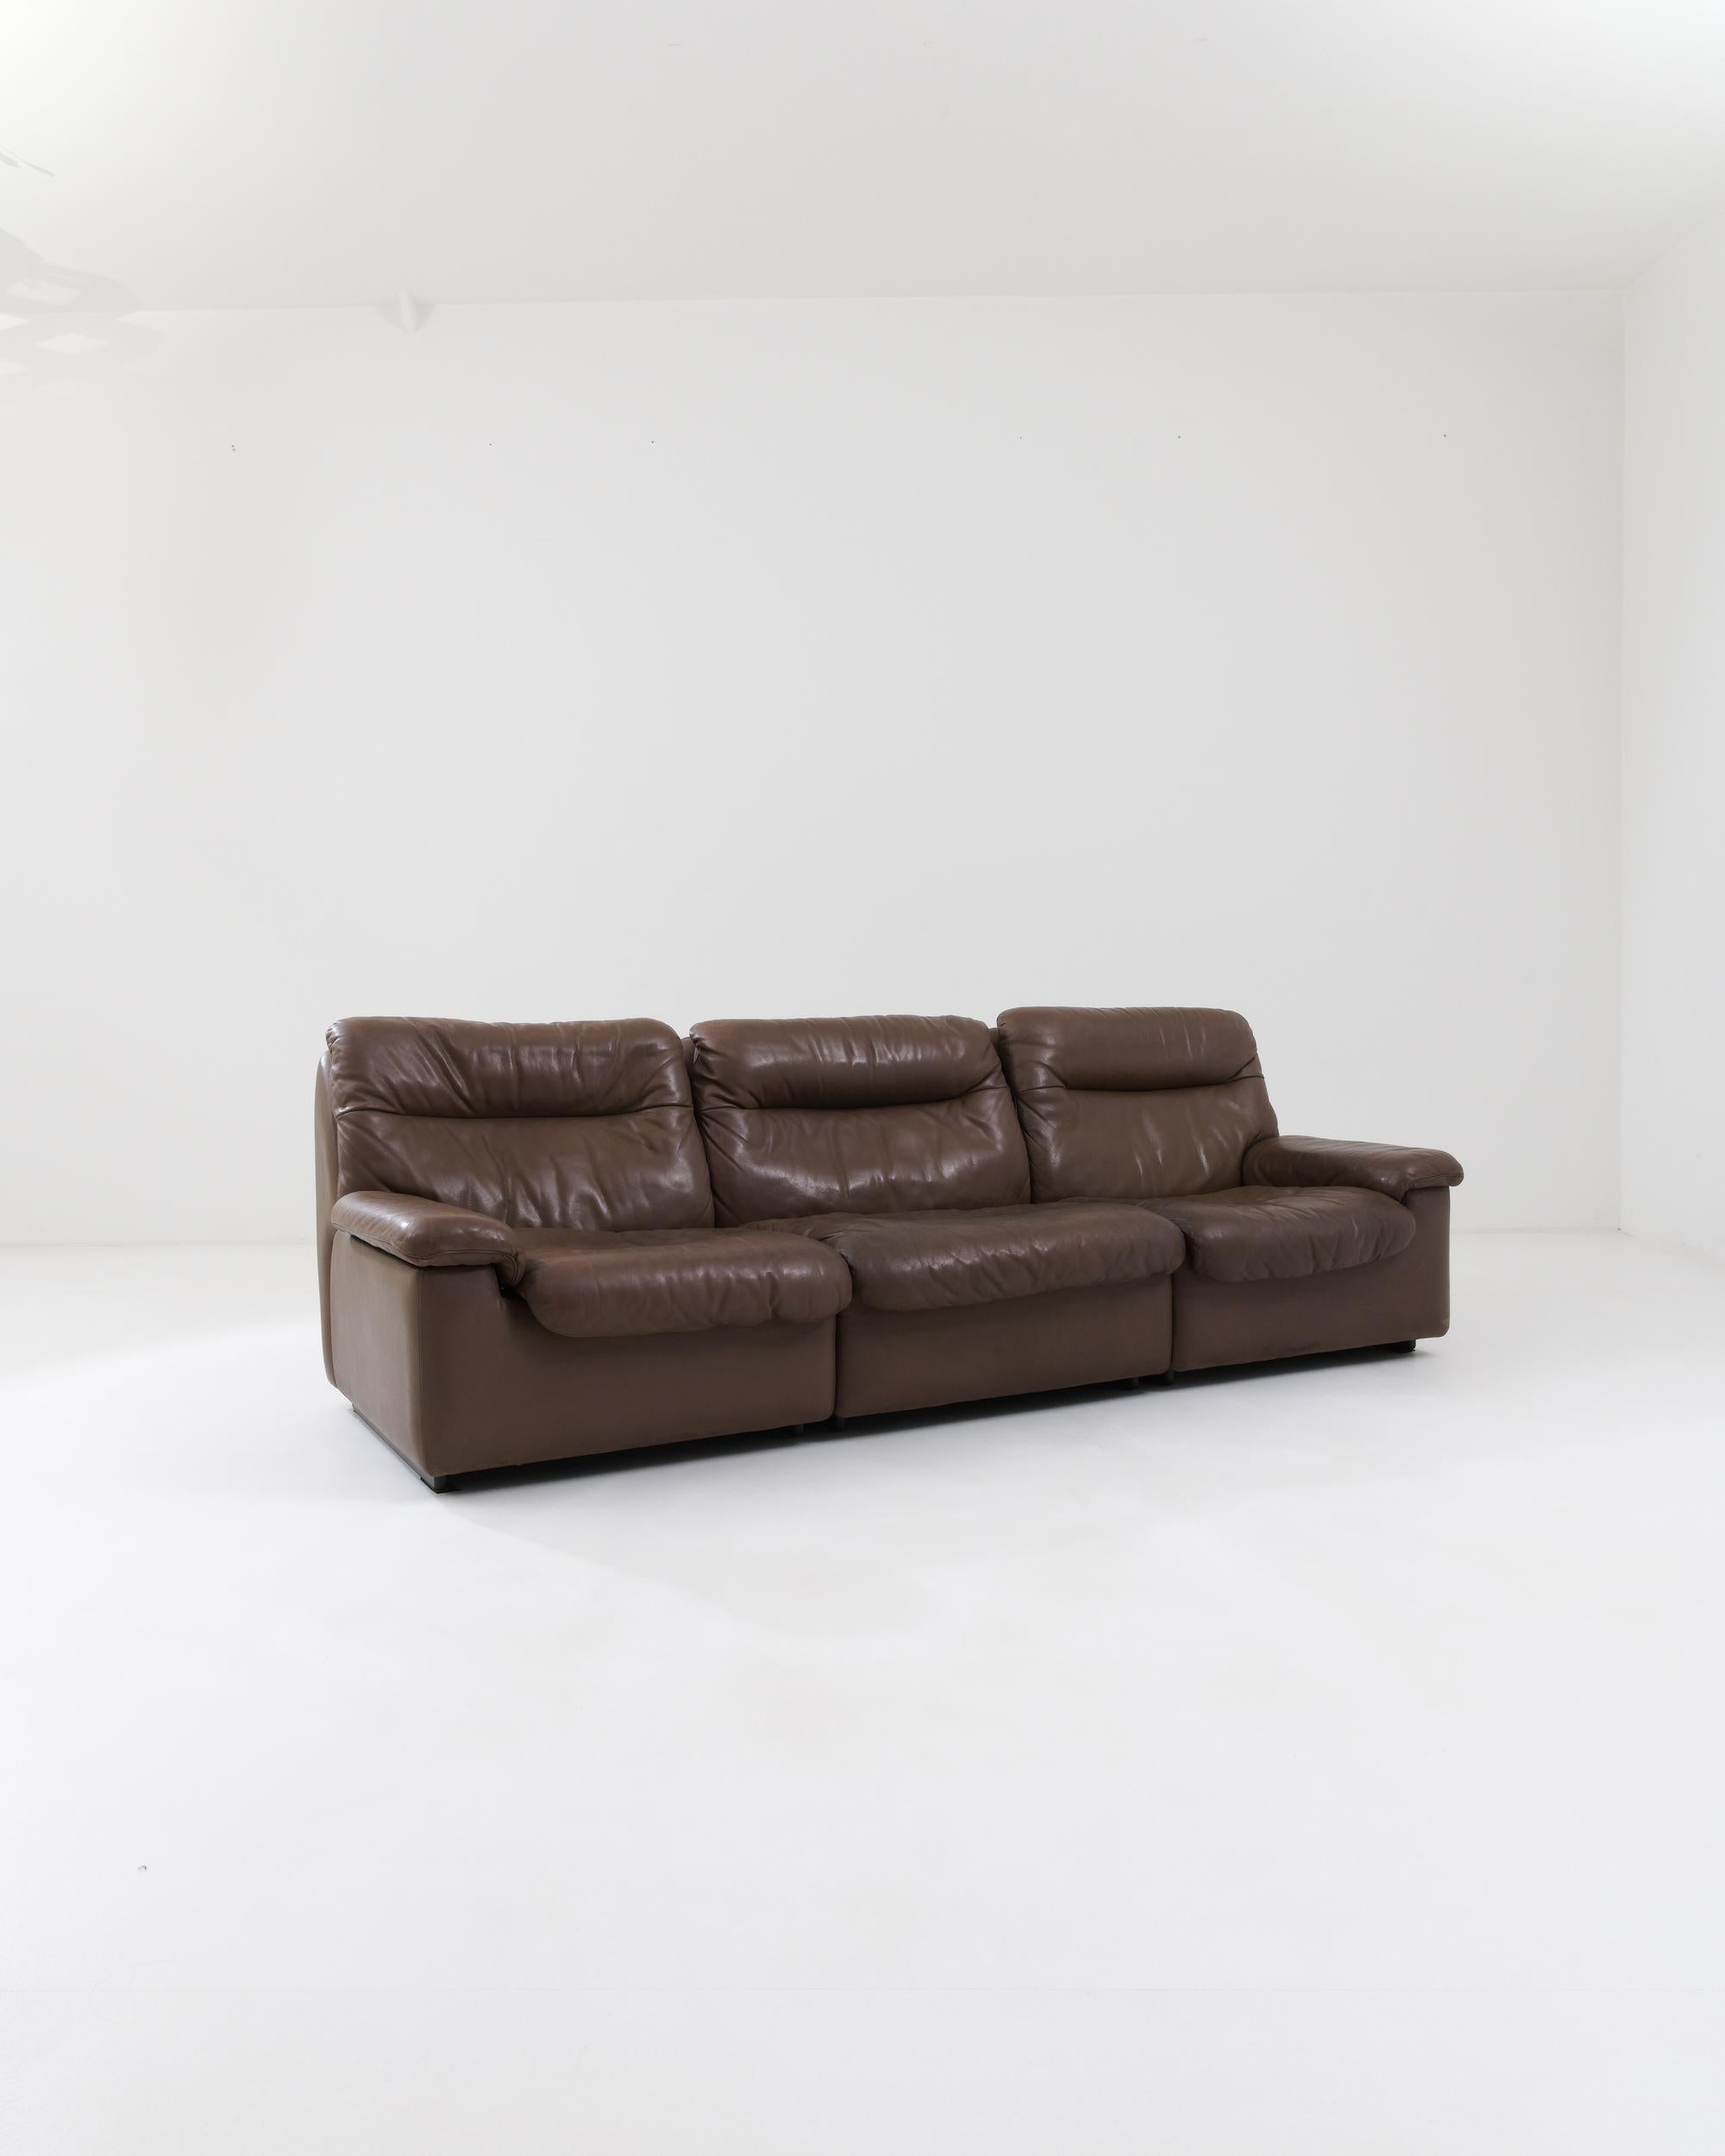 Late 20th Century 1970s Swiss Leather Ds66 Sofa by De Sede 